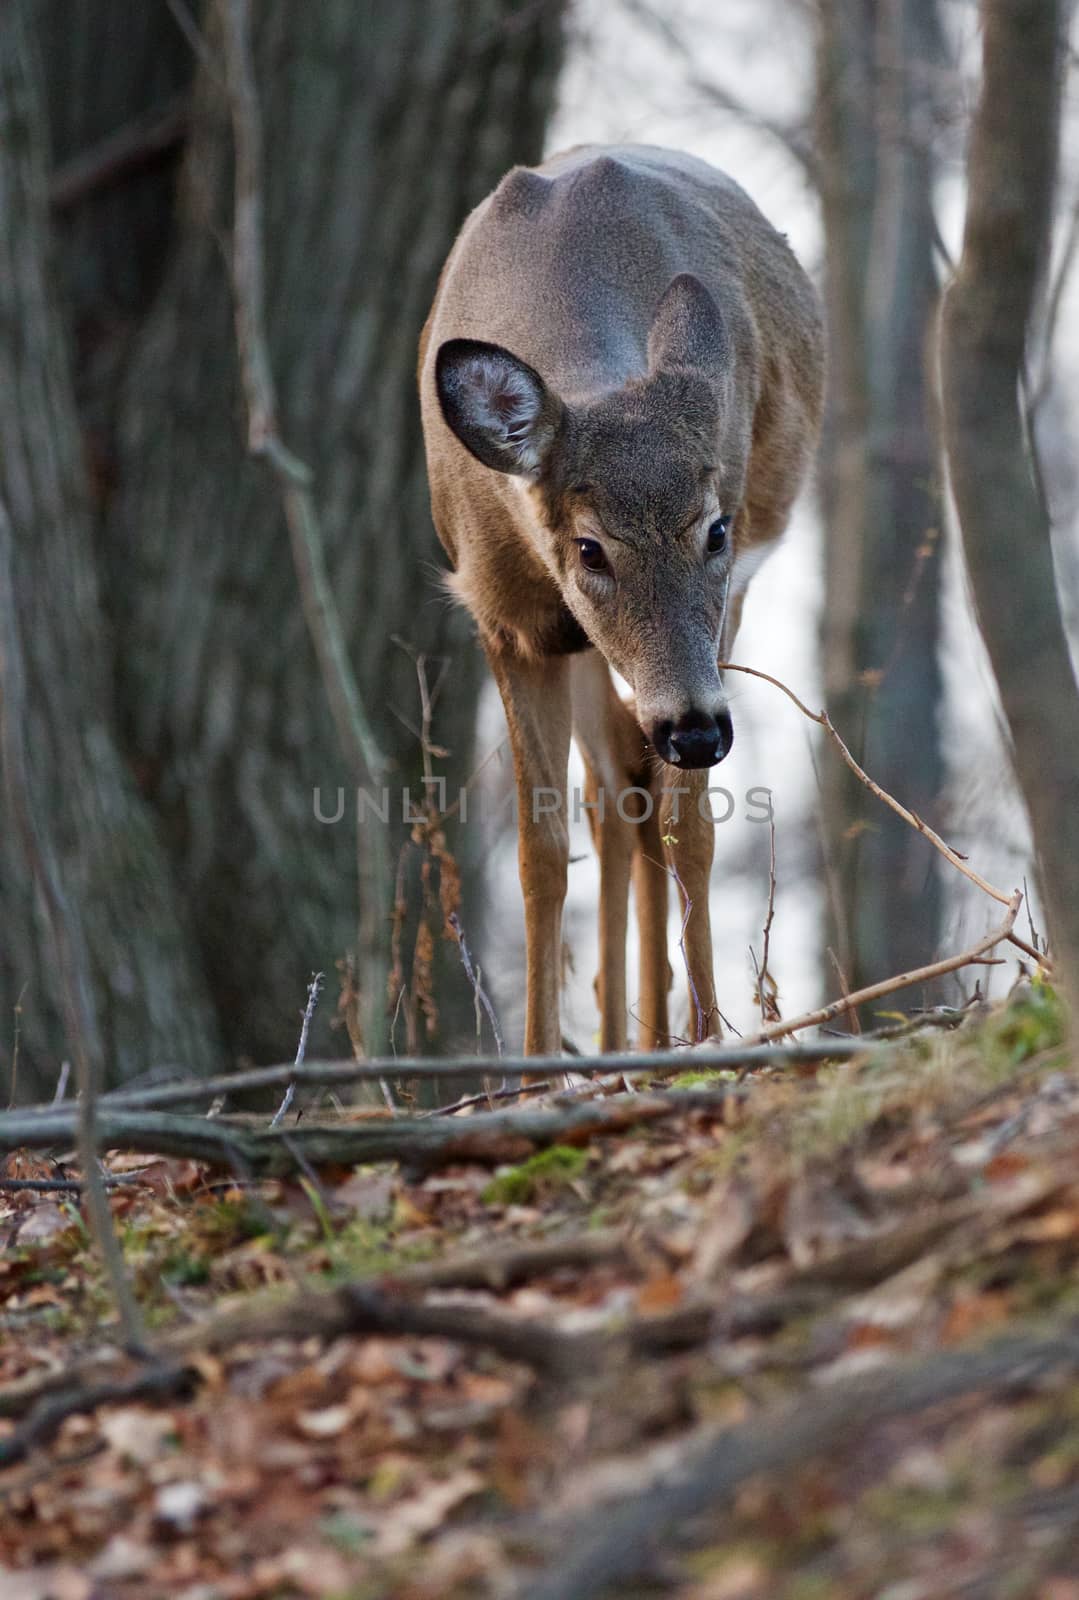 Photo of the deer searching something on the ground in the forest